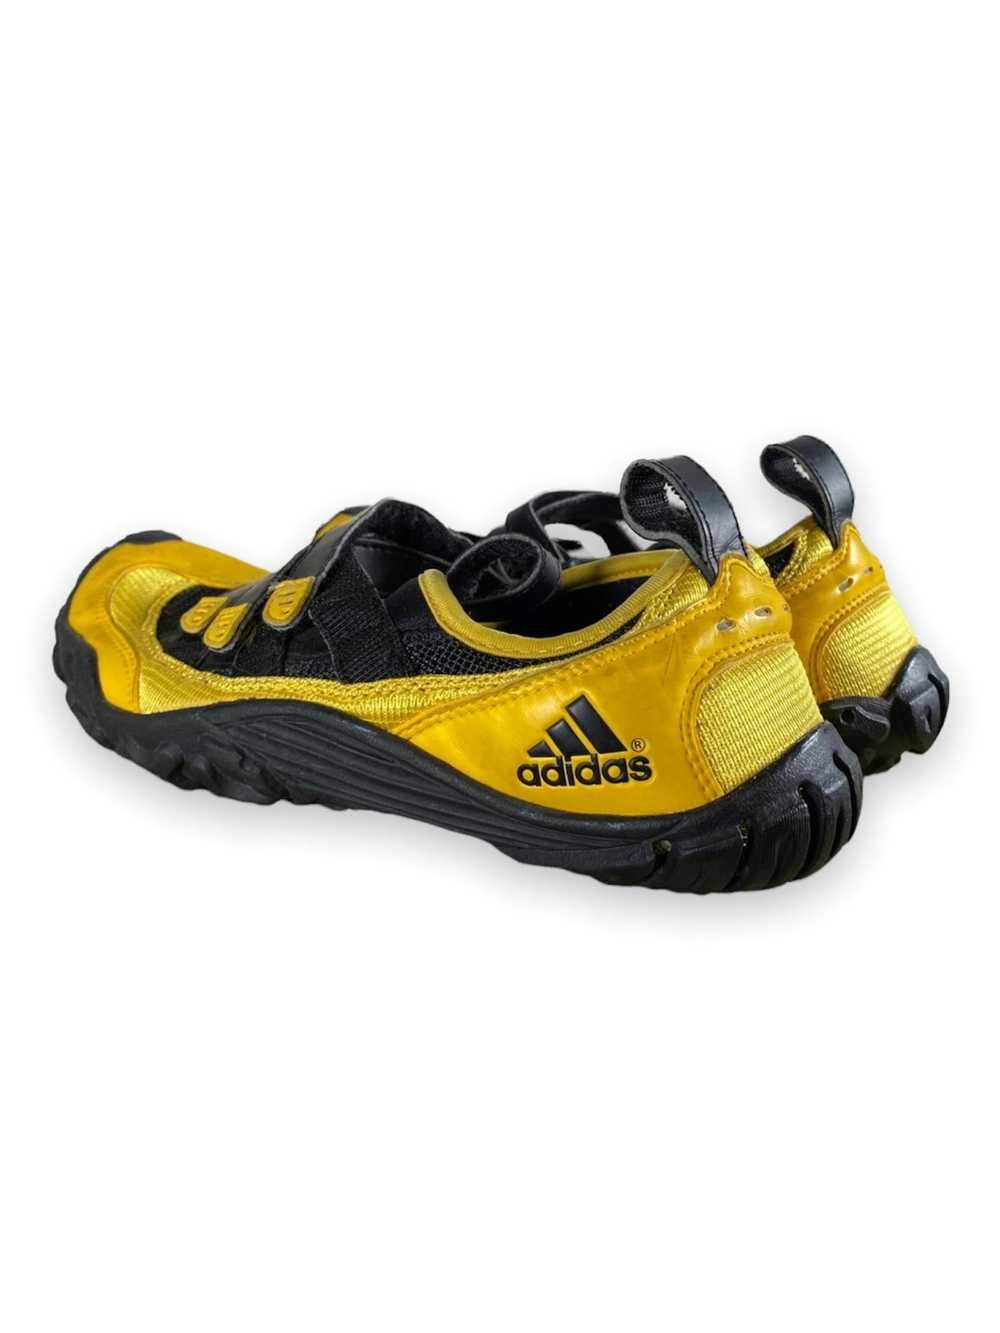 Vintage Velcro Water Shoes - image 3